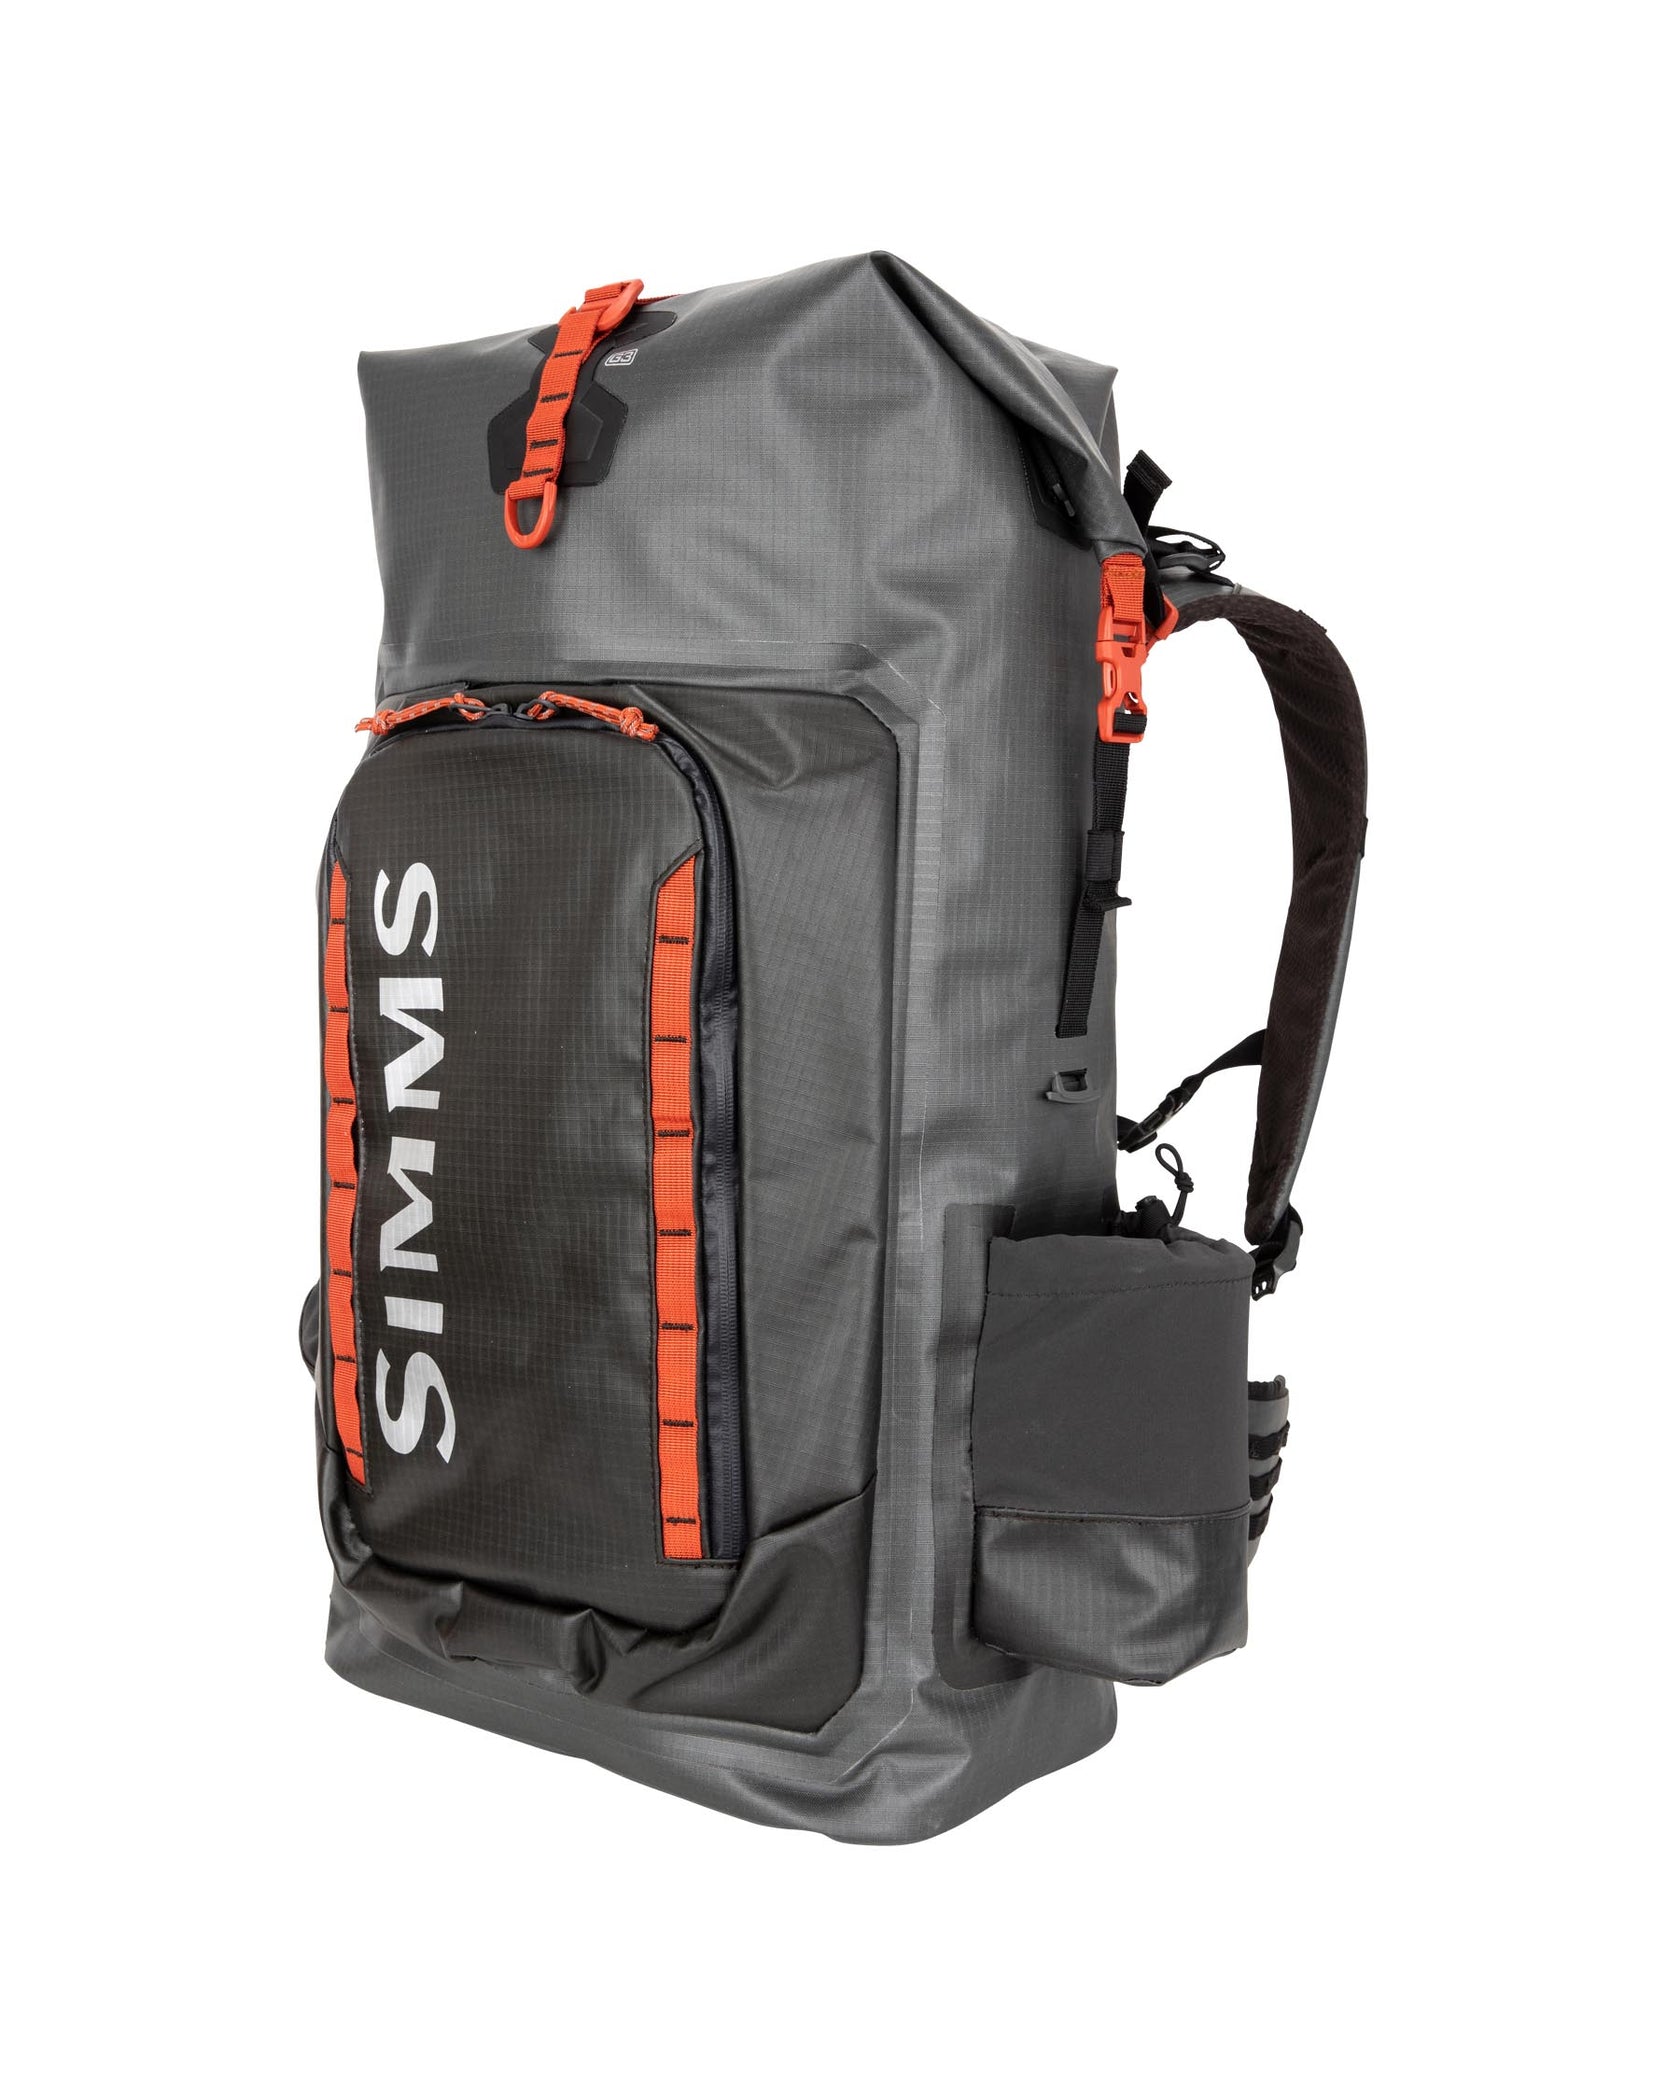 SIMMS G3 Guide Backpack - Atlantic Rivers Outfitting Company